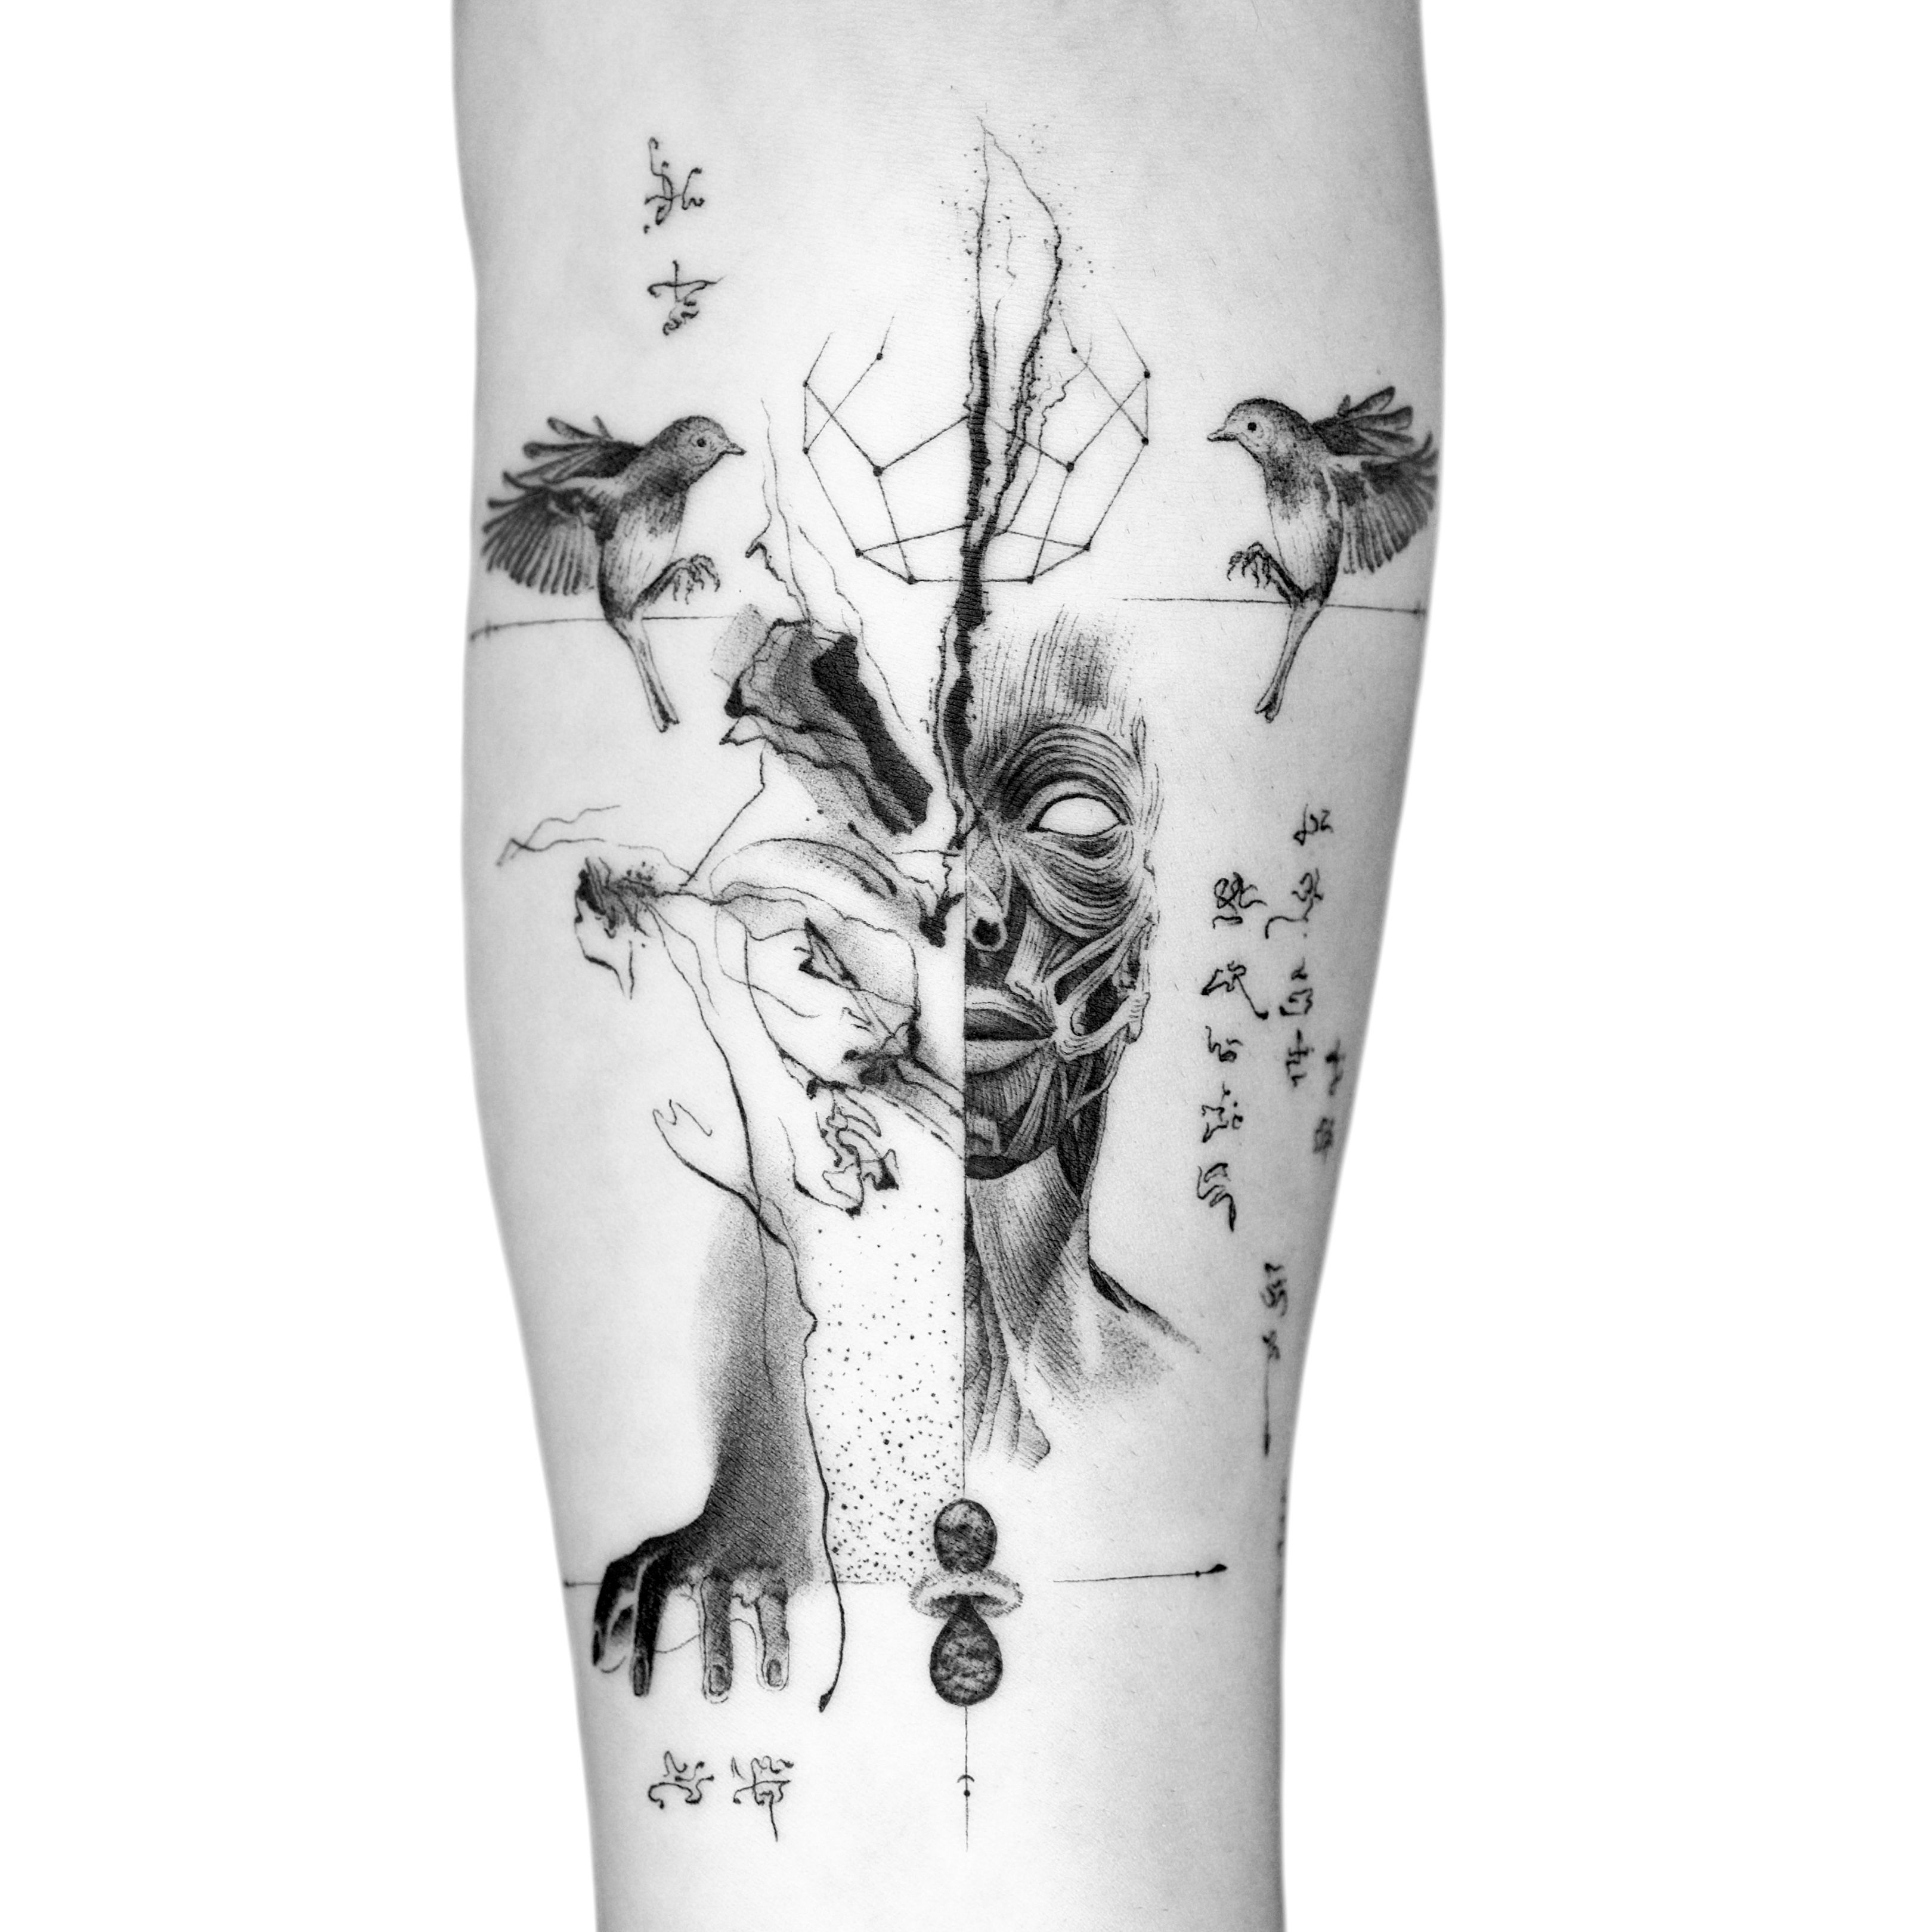 Healing Trauma with the Help of Tattoo Art | Psychology Today